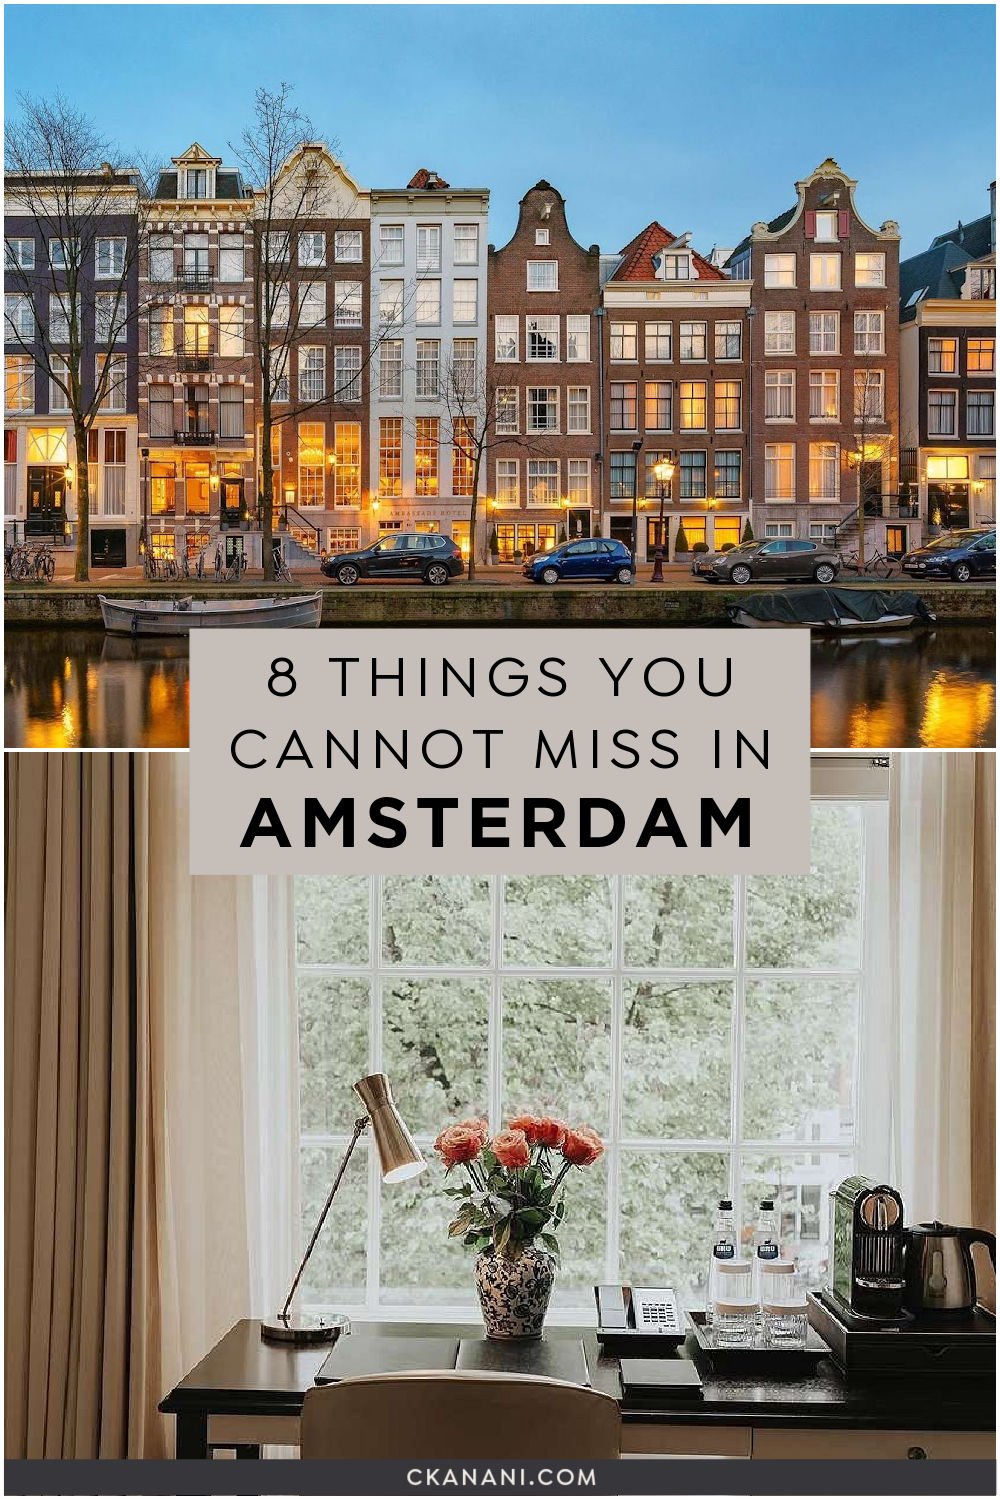 8 things you cannot miss in Amsterdam! 3 days in Amsterdam itinerary. Amsterdam travel tips, Amsterdam visit, Amsterdam itinerary, the Netherlands itinerary, Europe trip, Europe travel